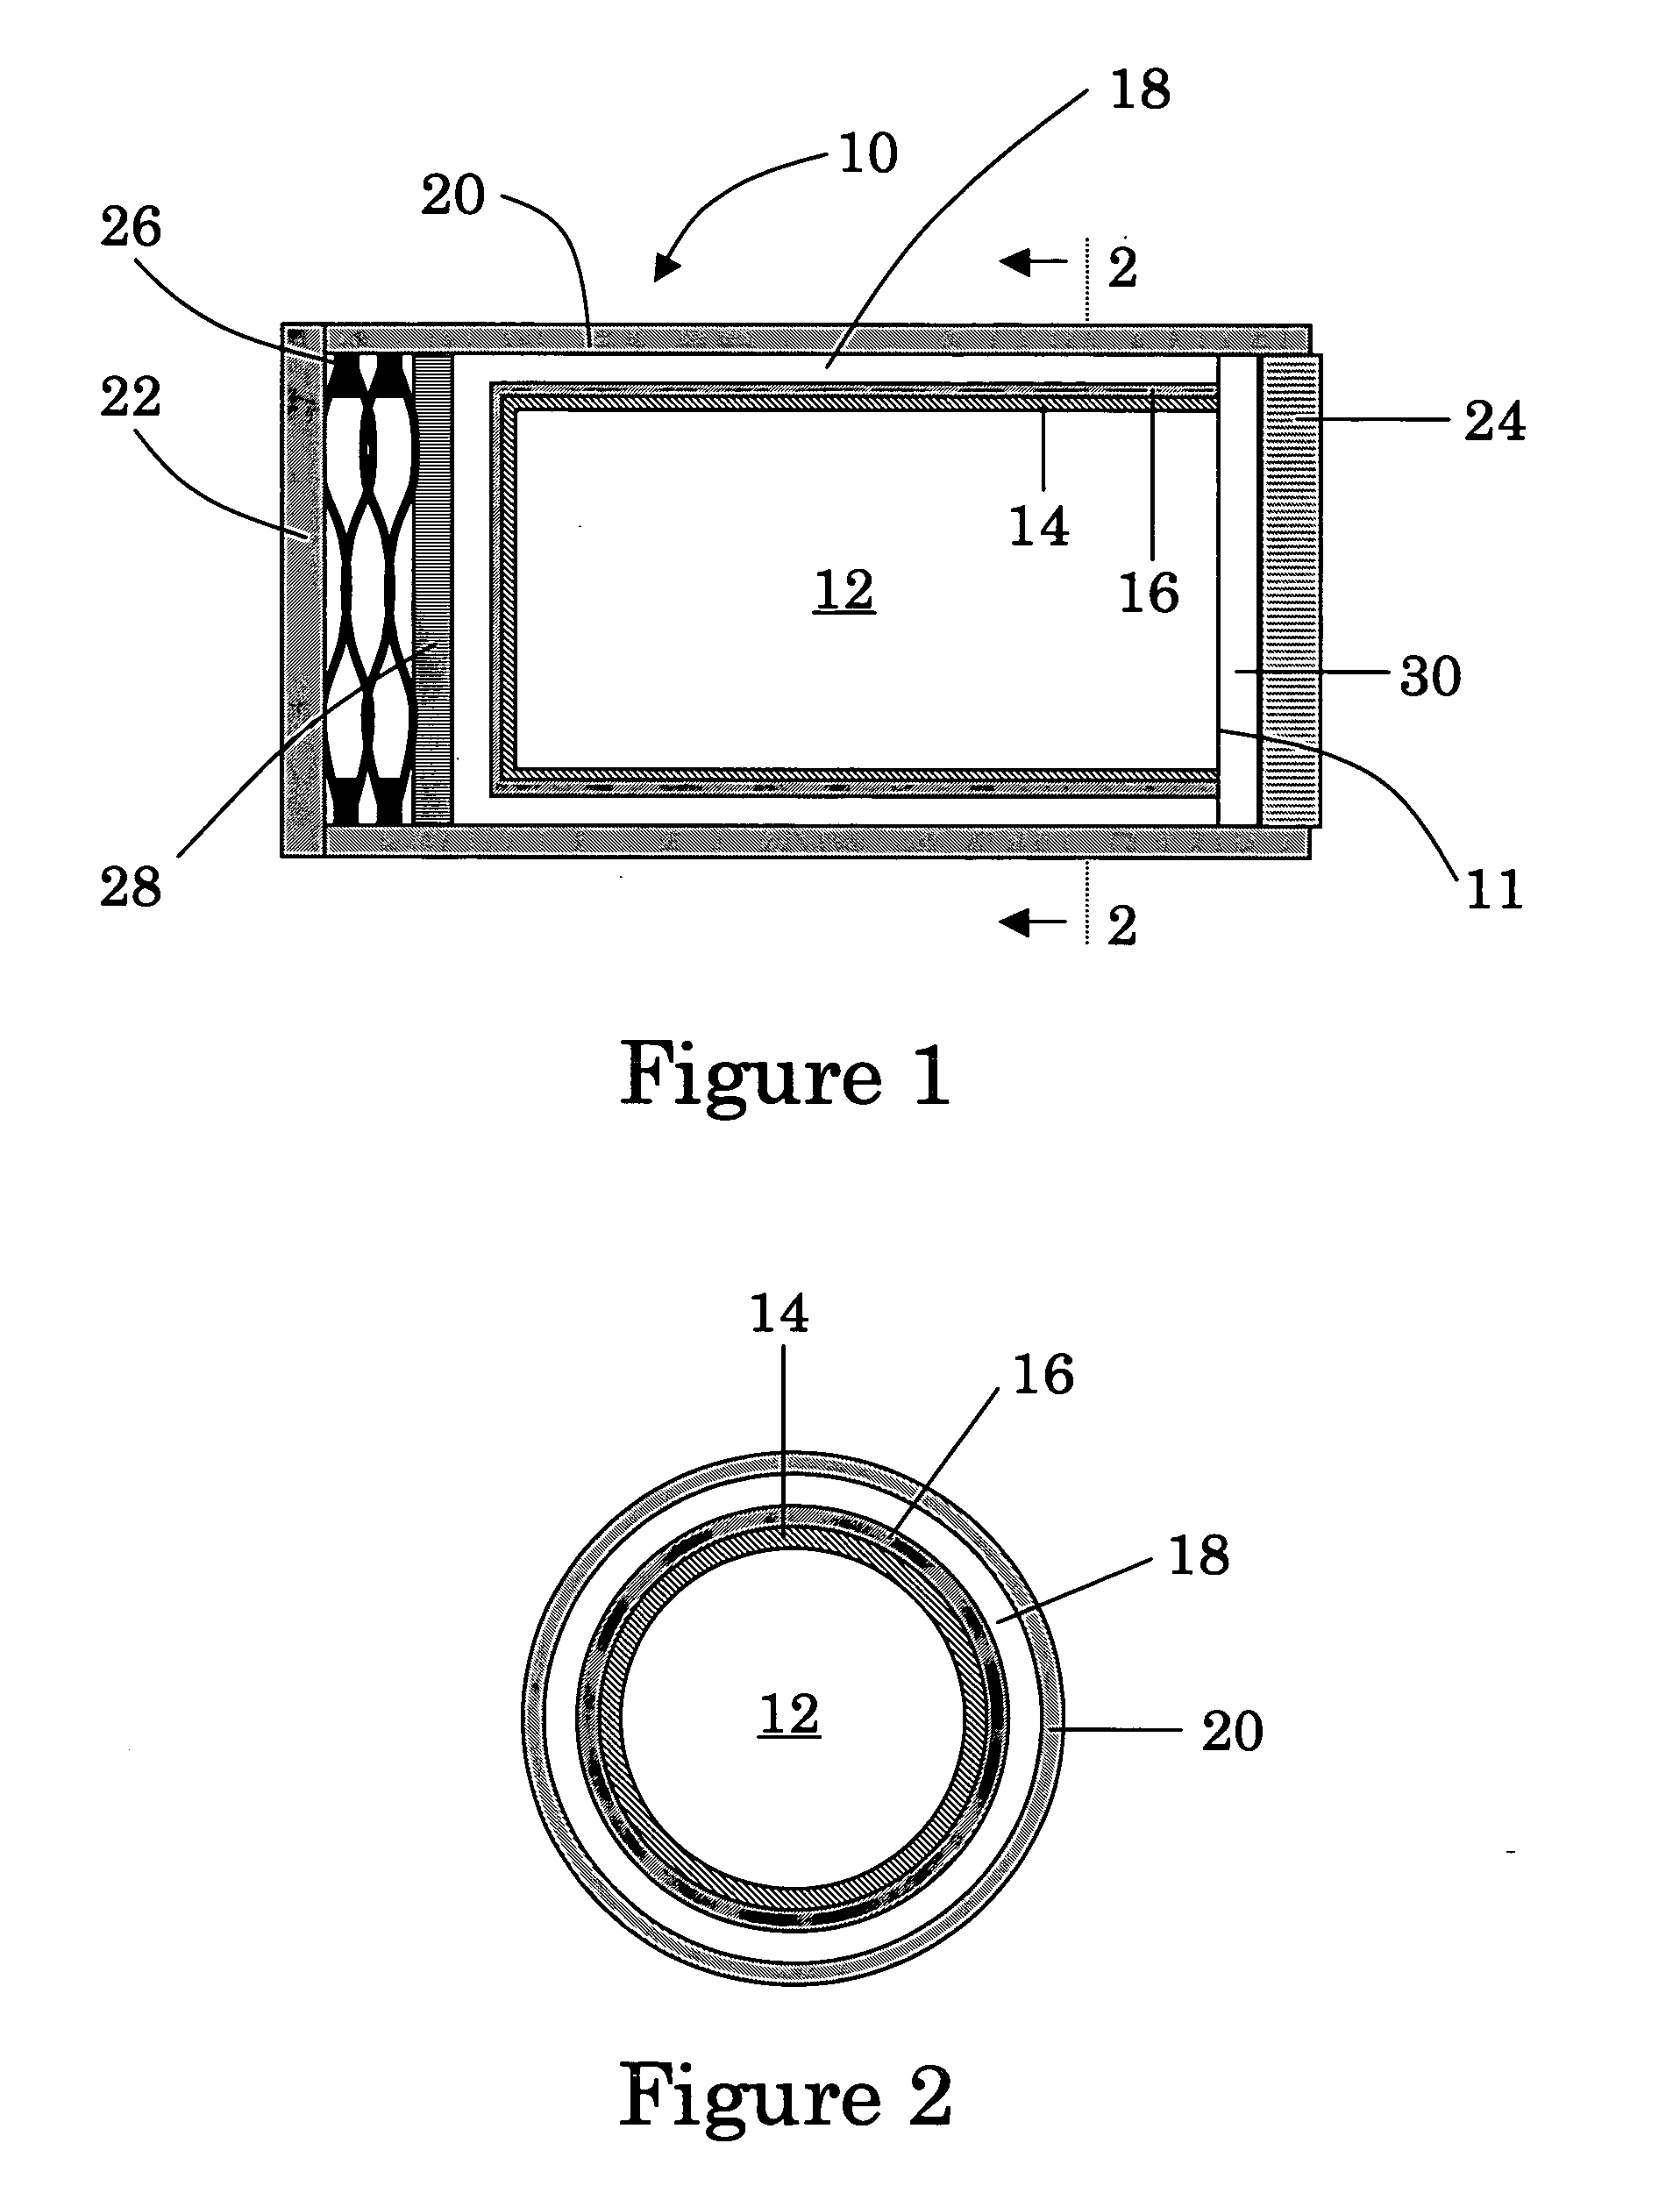 Covering of scintillation detector with a reflective coating